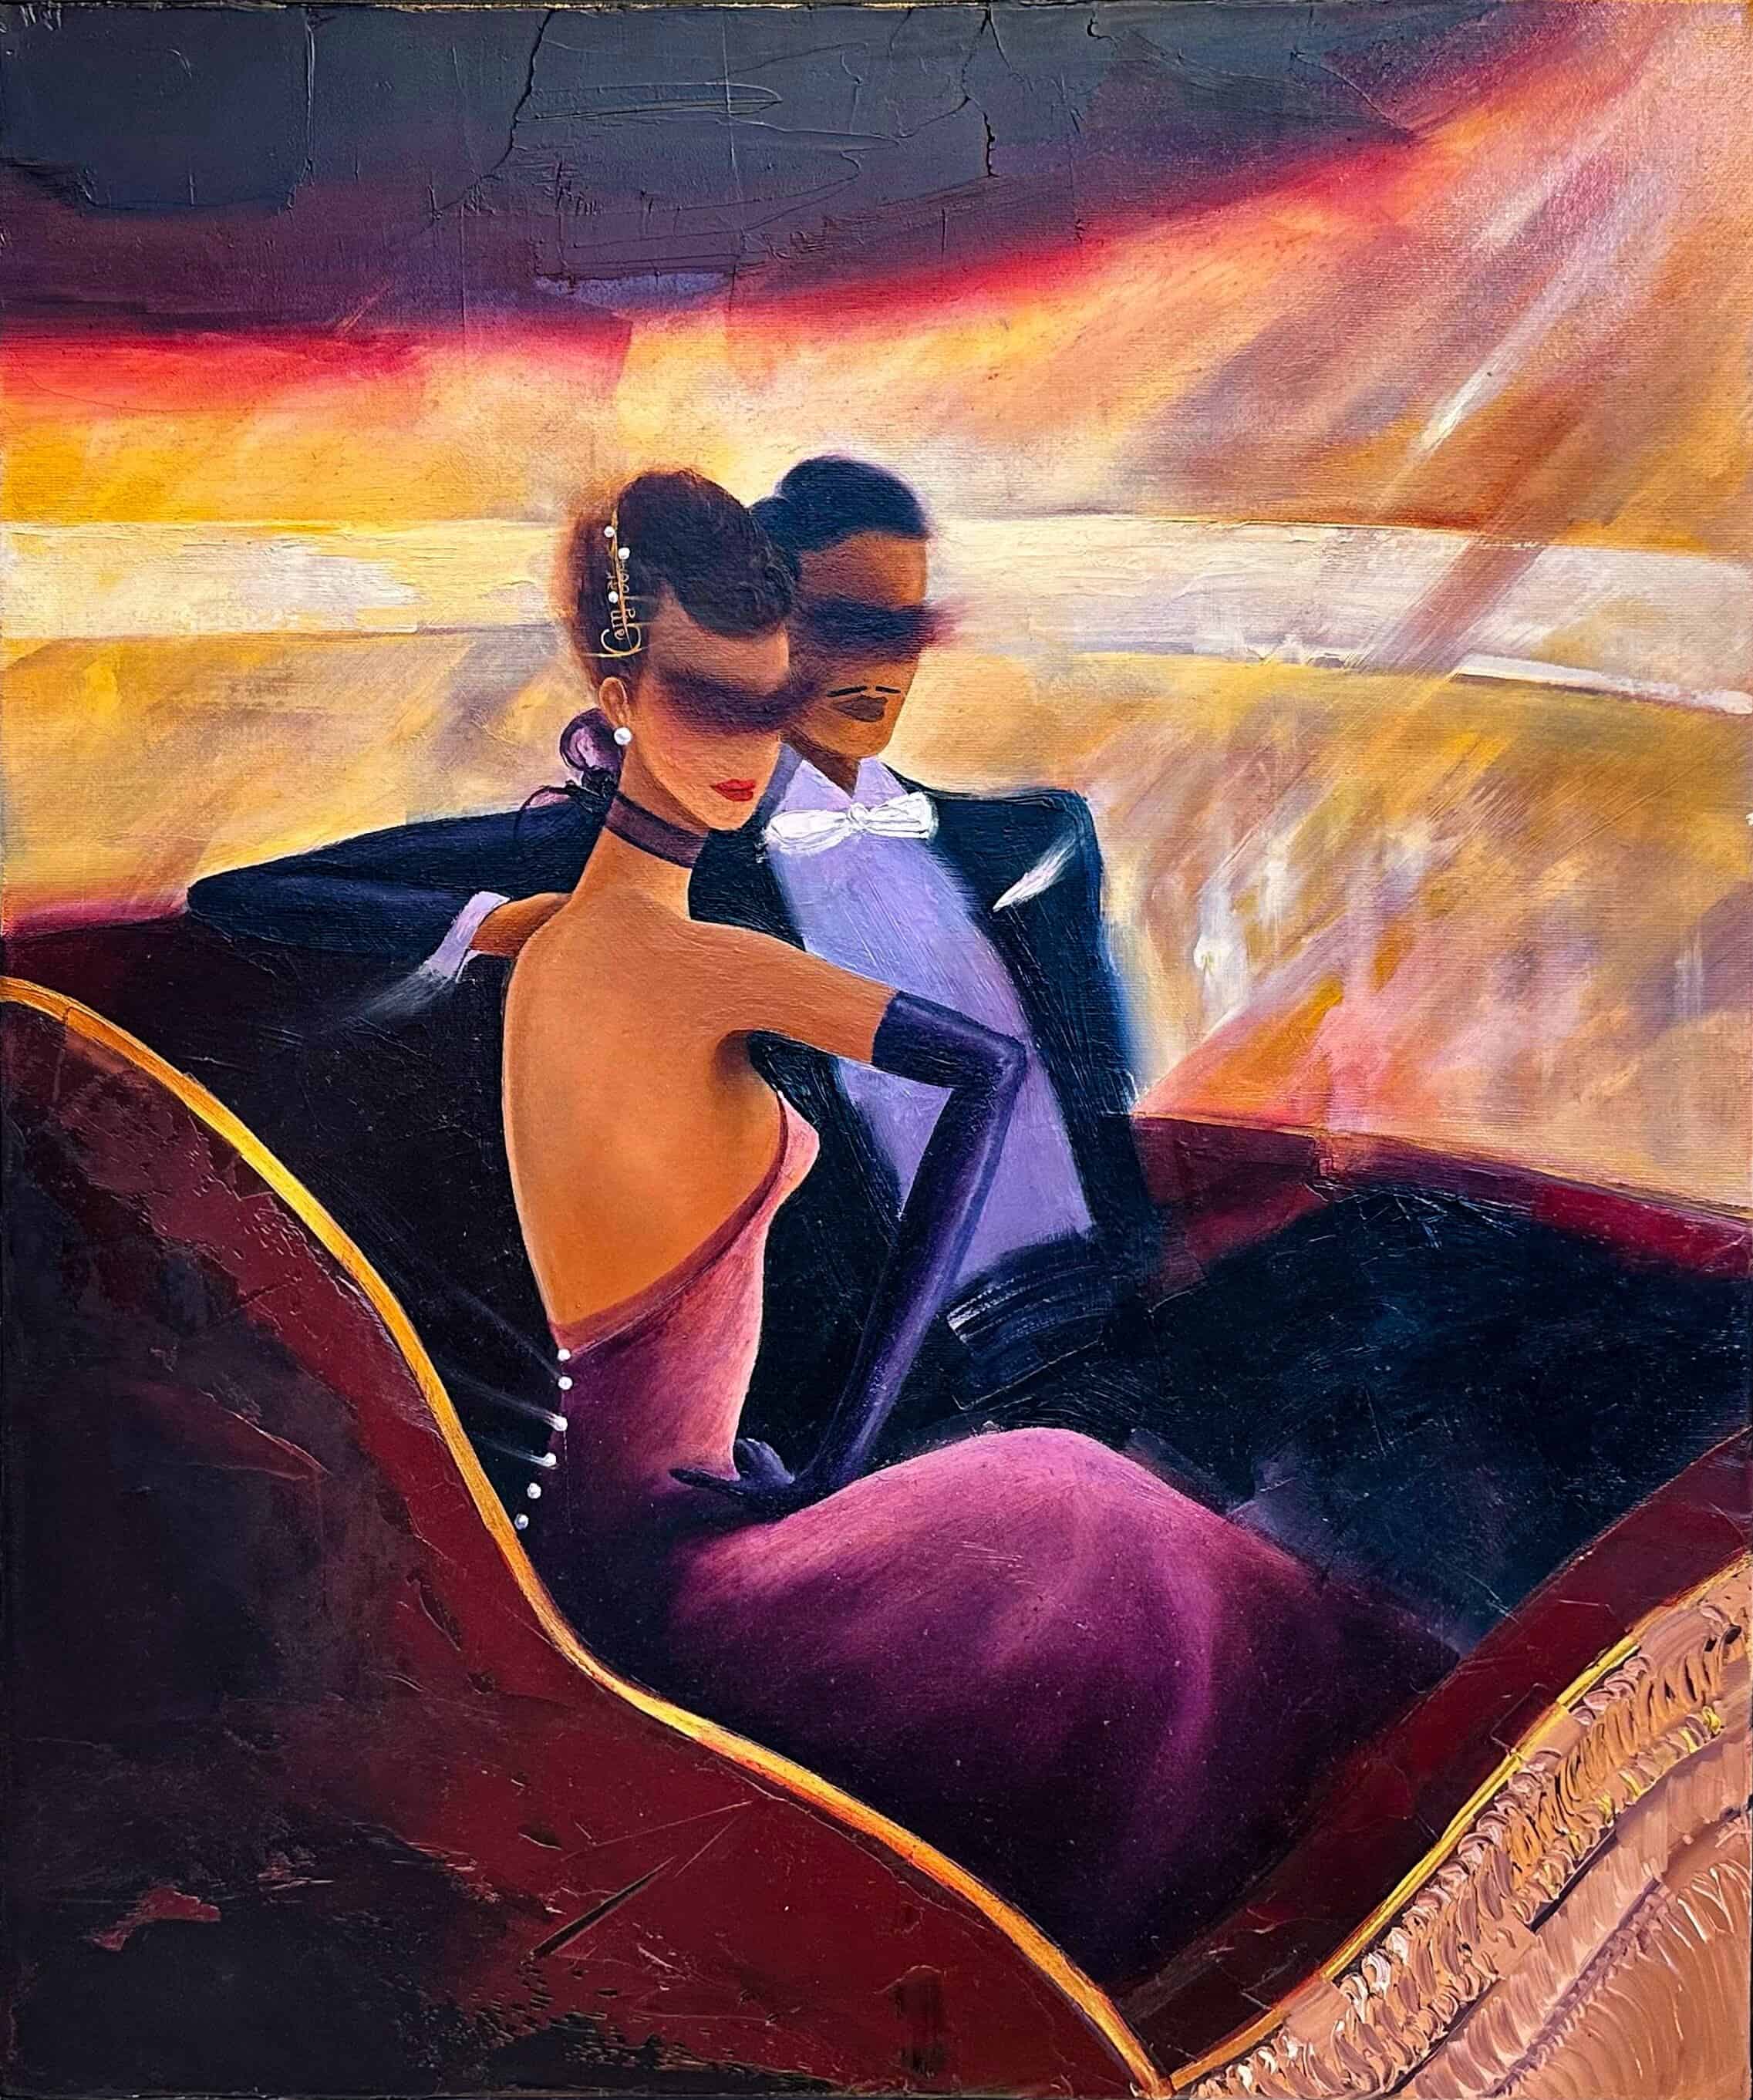 Contemporary Art. Title: The Opera Box Ⅱ, Oil on Canvas, 24 x 20 in by Canadian Artist Kamiar Gajoum.